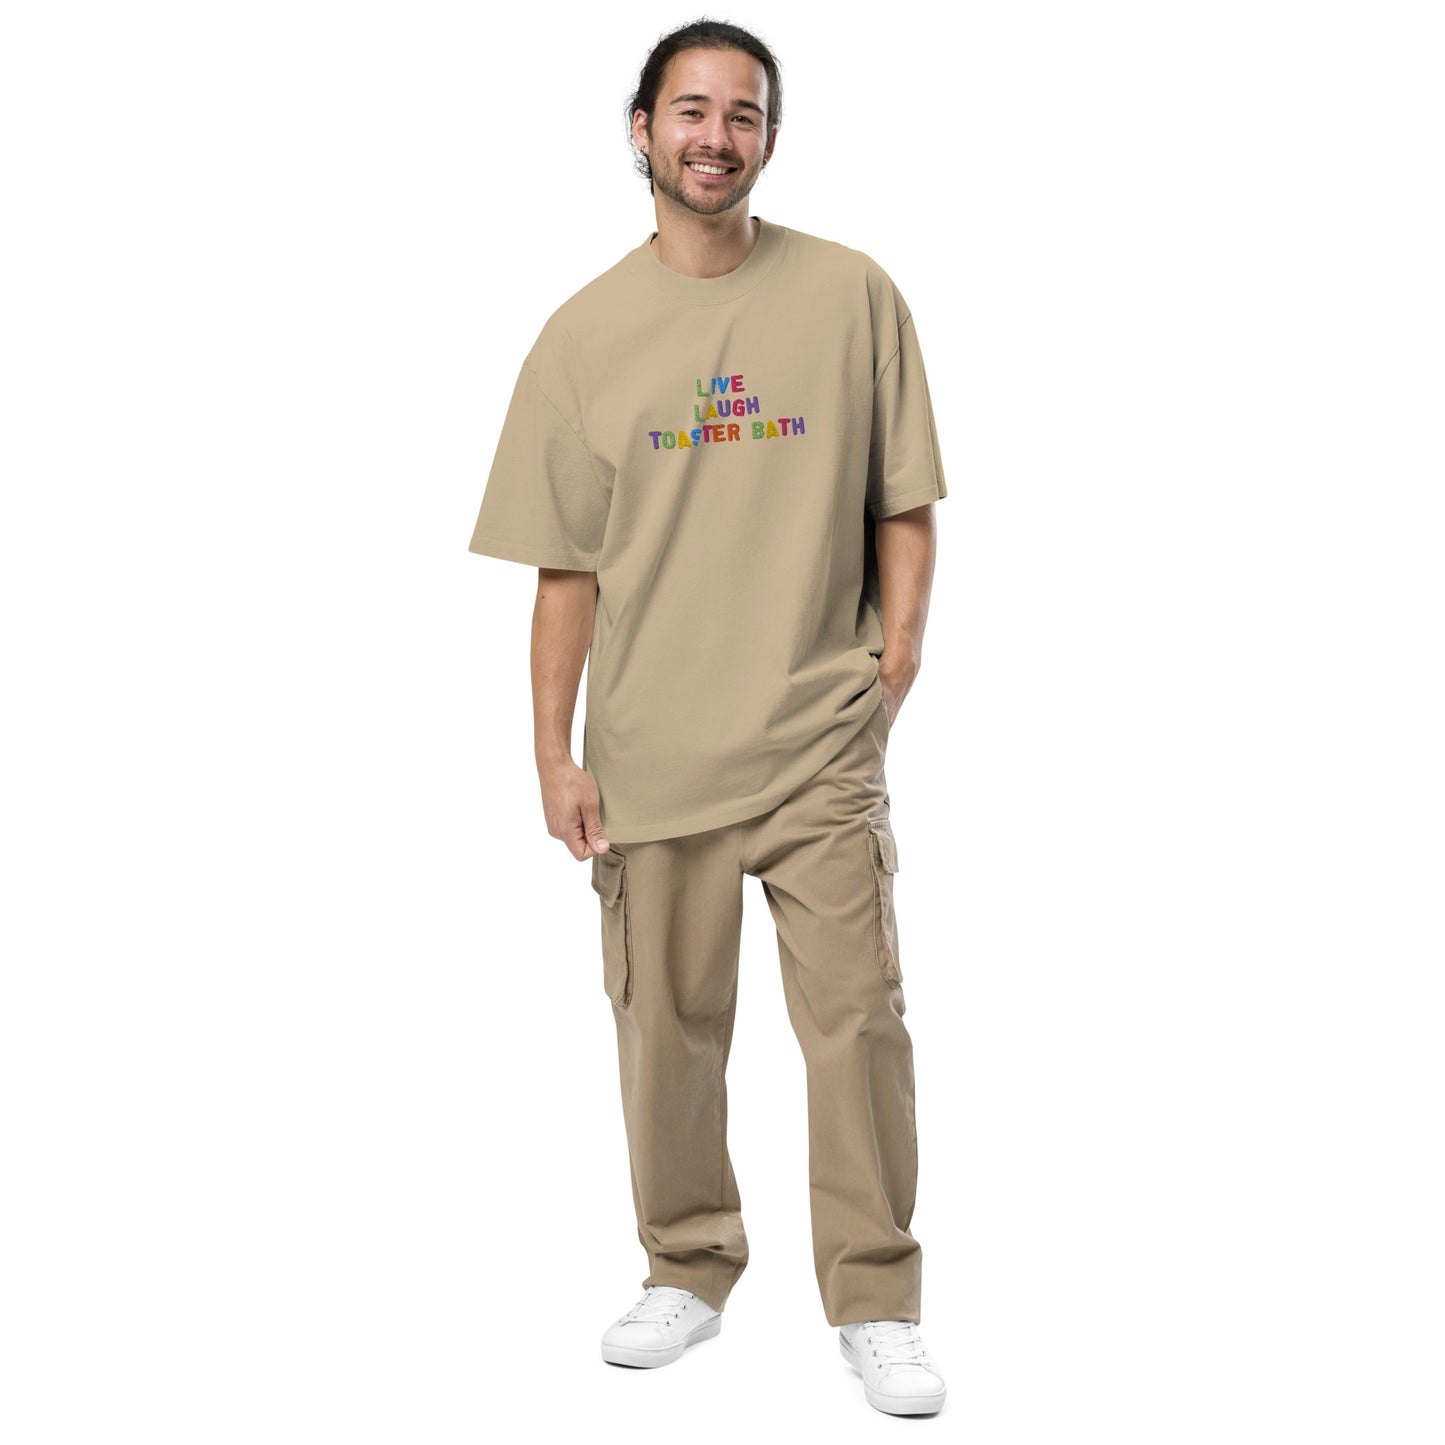 Live, Laugh, Toaster Bath Embroidered Oversized Faded T-Shirt